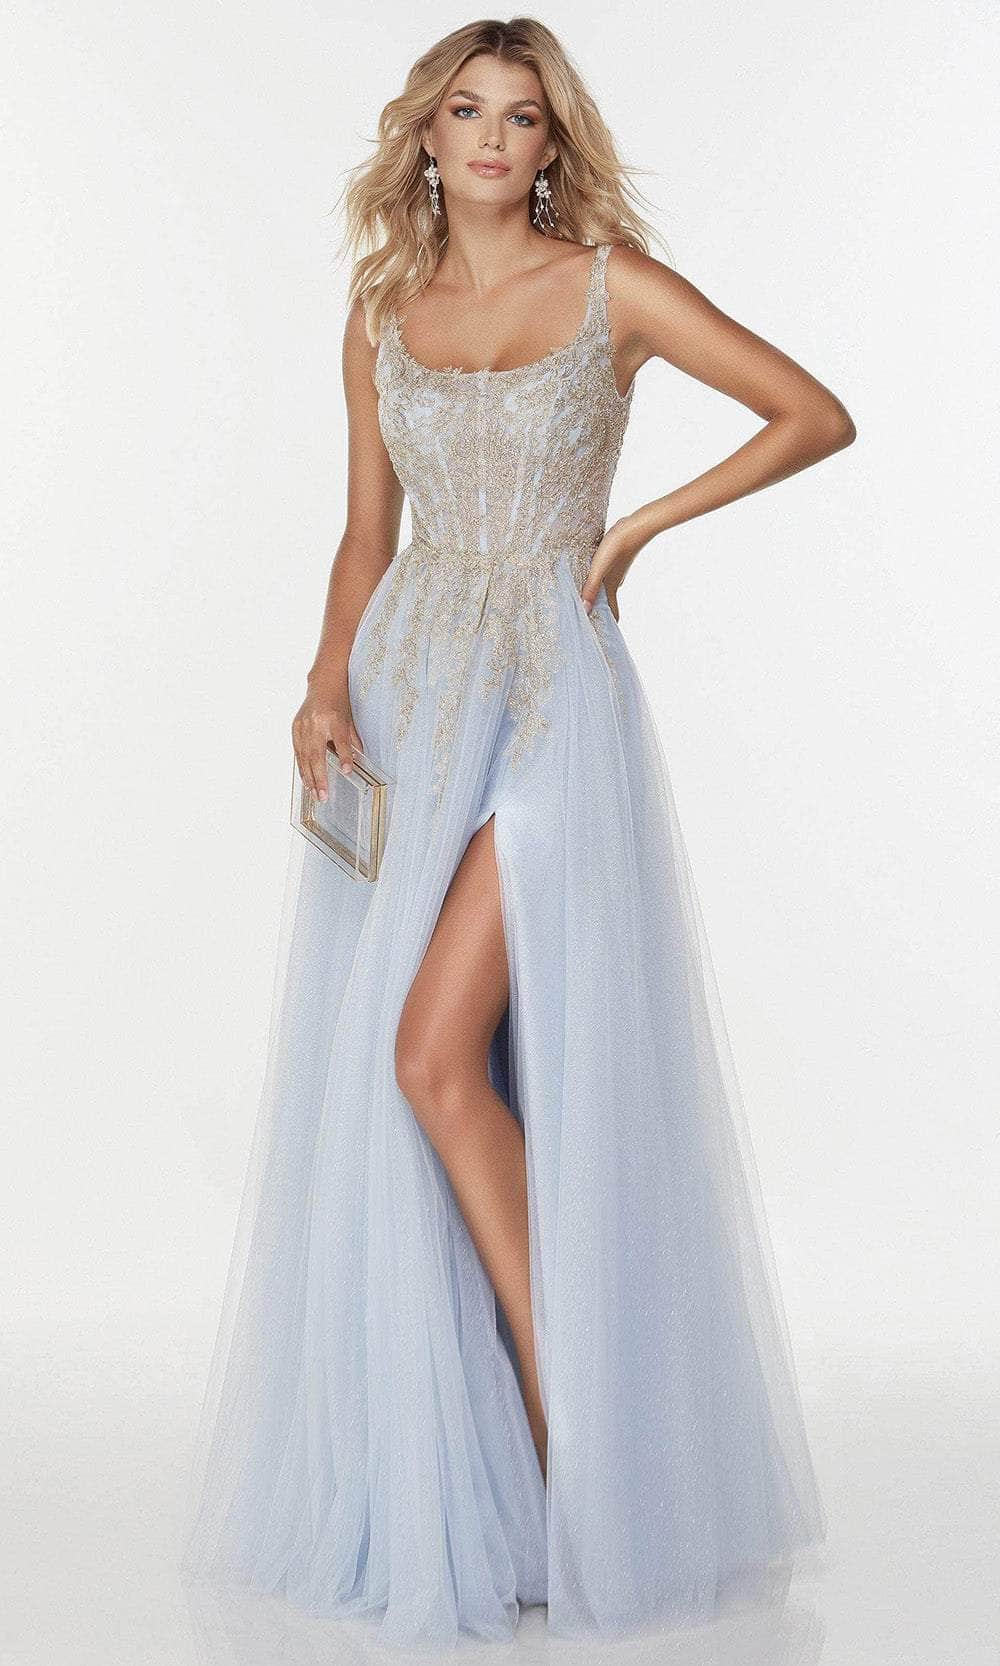 Alyce Paris 61071 - Sleeveless Tulle Evening Gown Special Occasion Dress